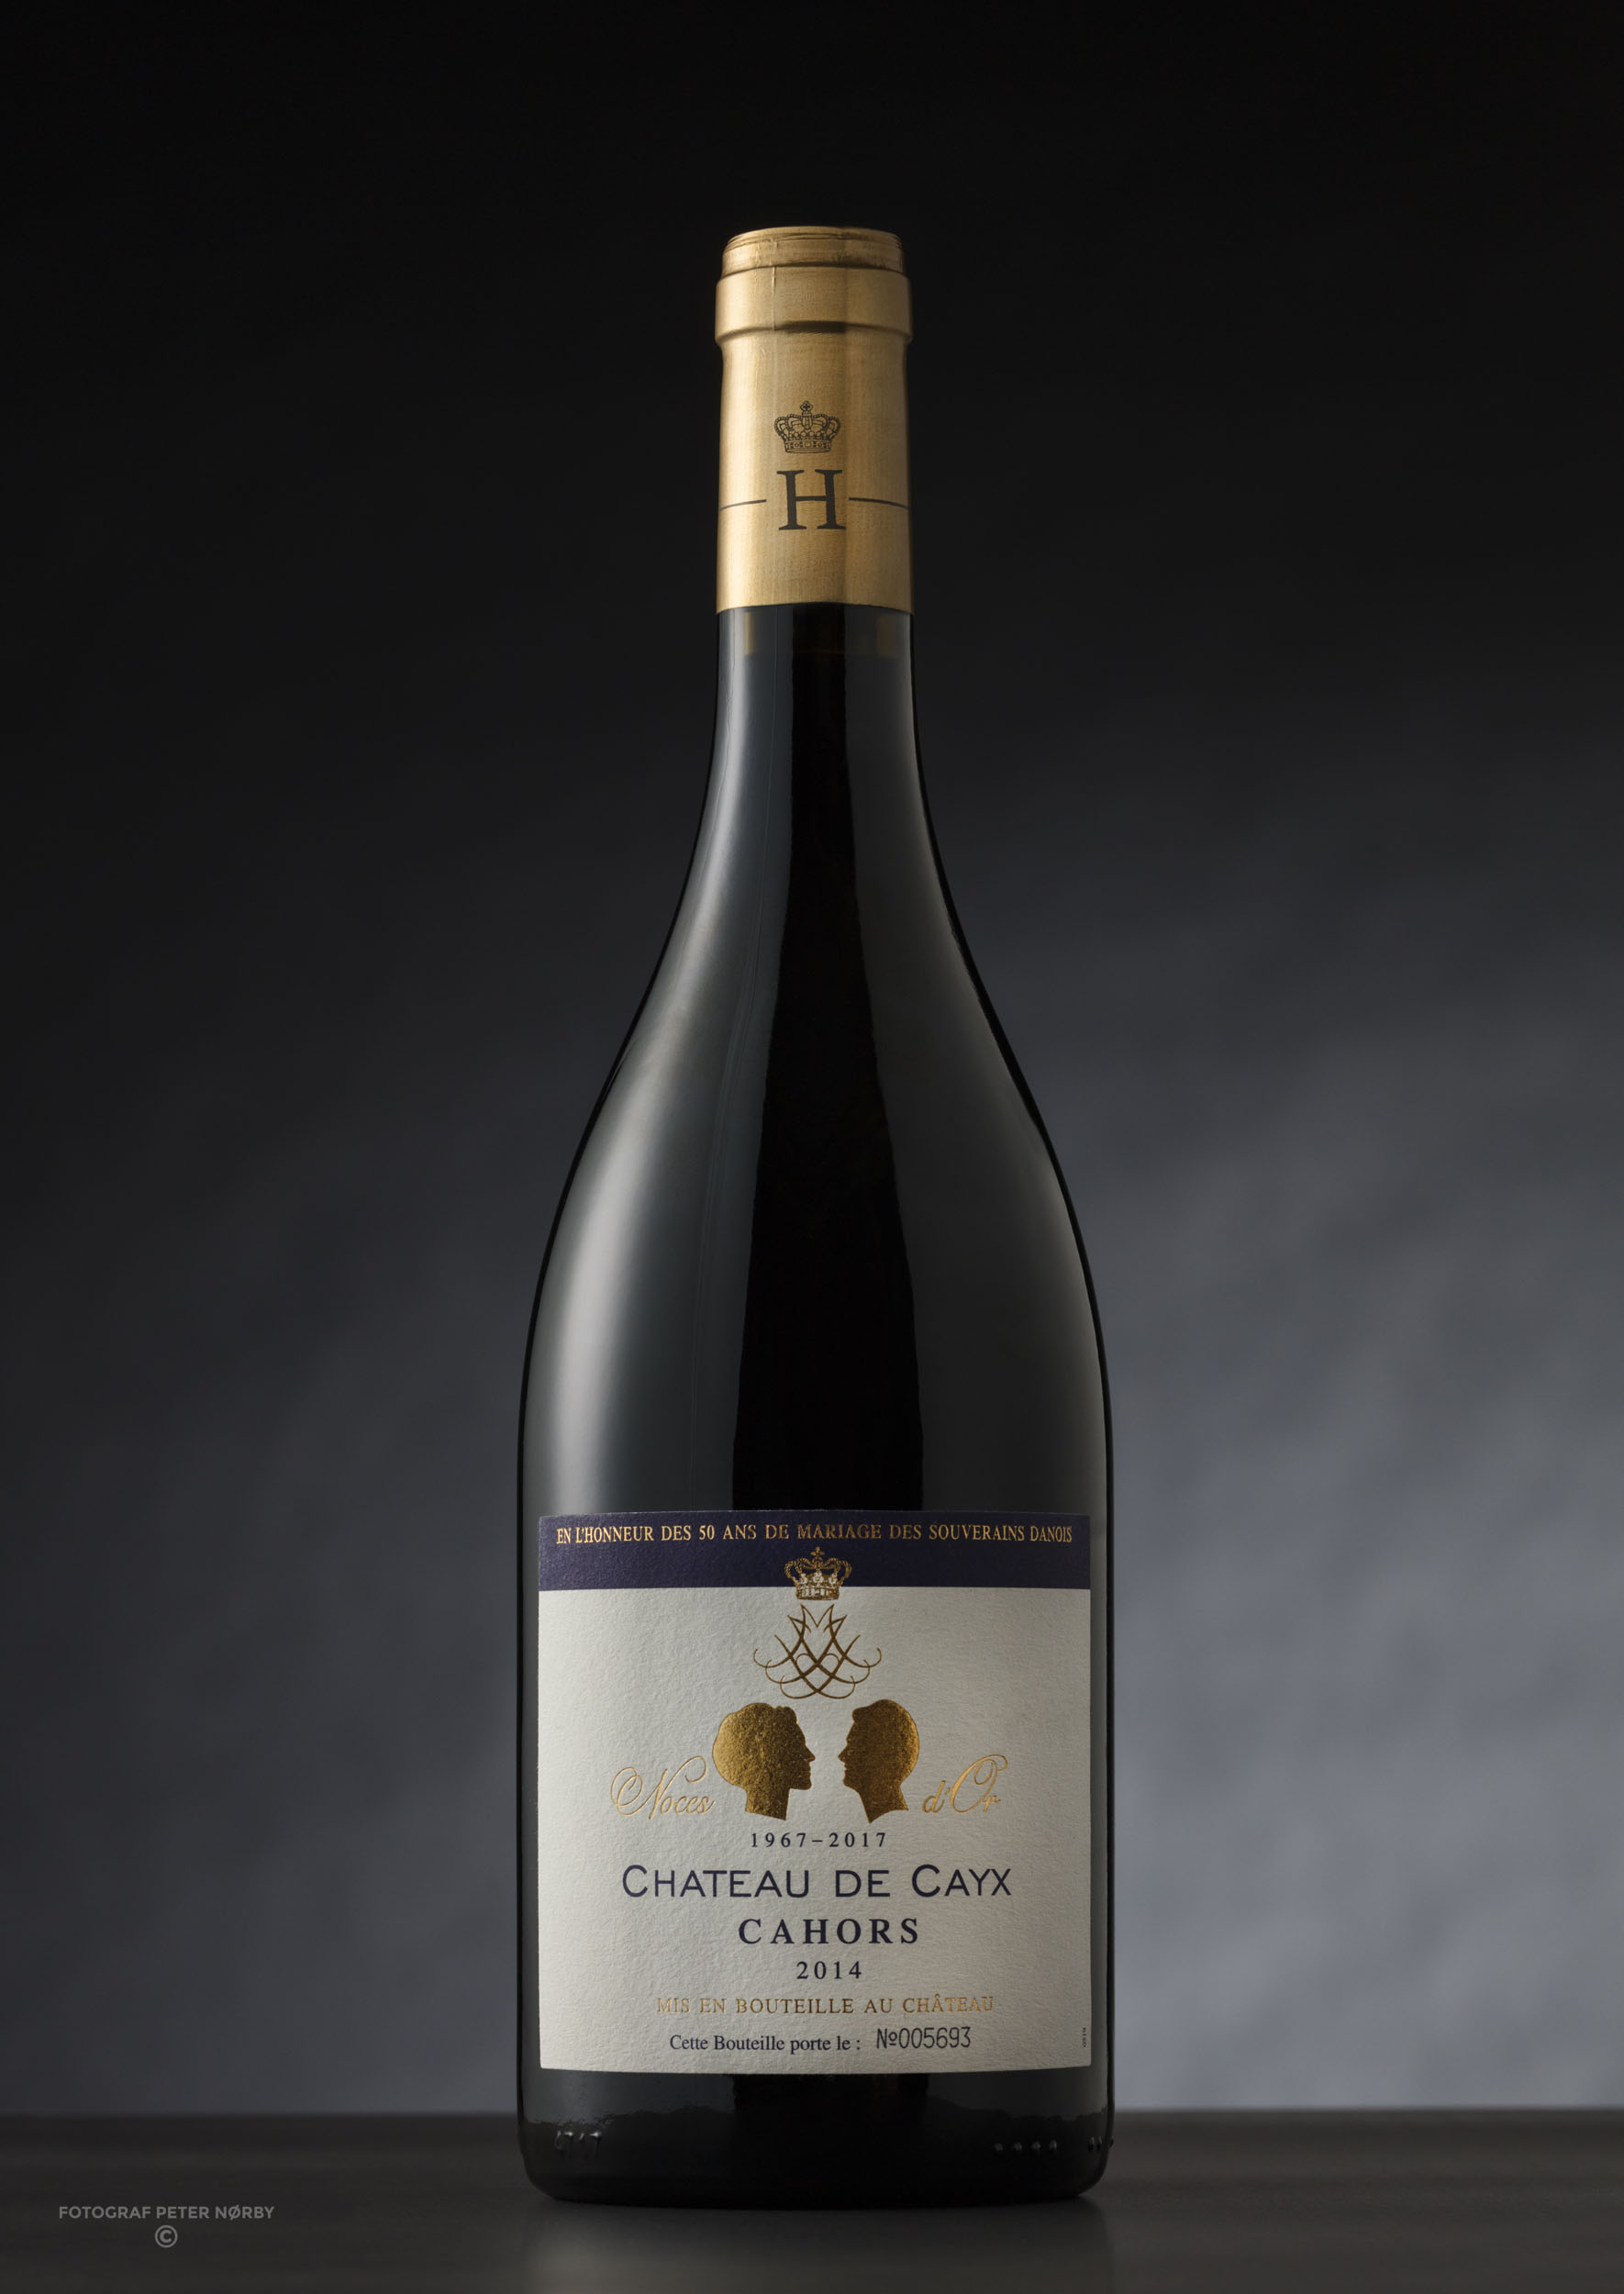  Chateau De Cayx served at the 50th wedding anniversary in 2017 